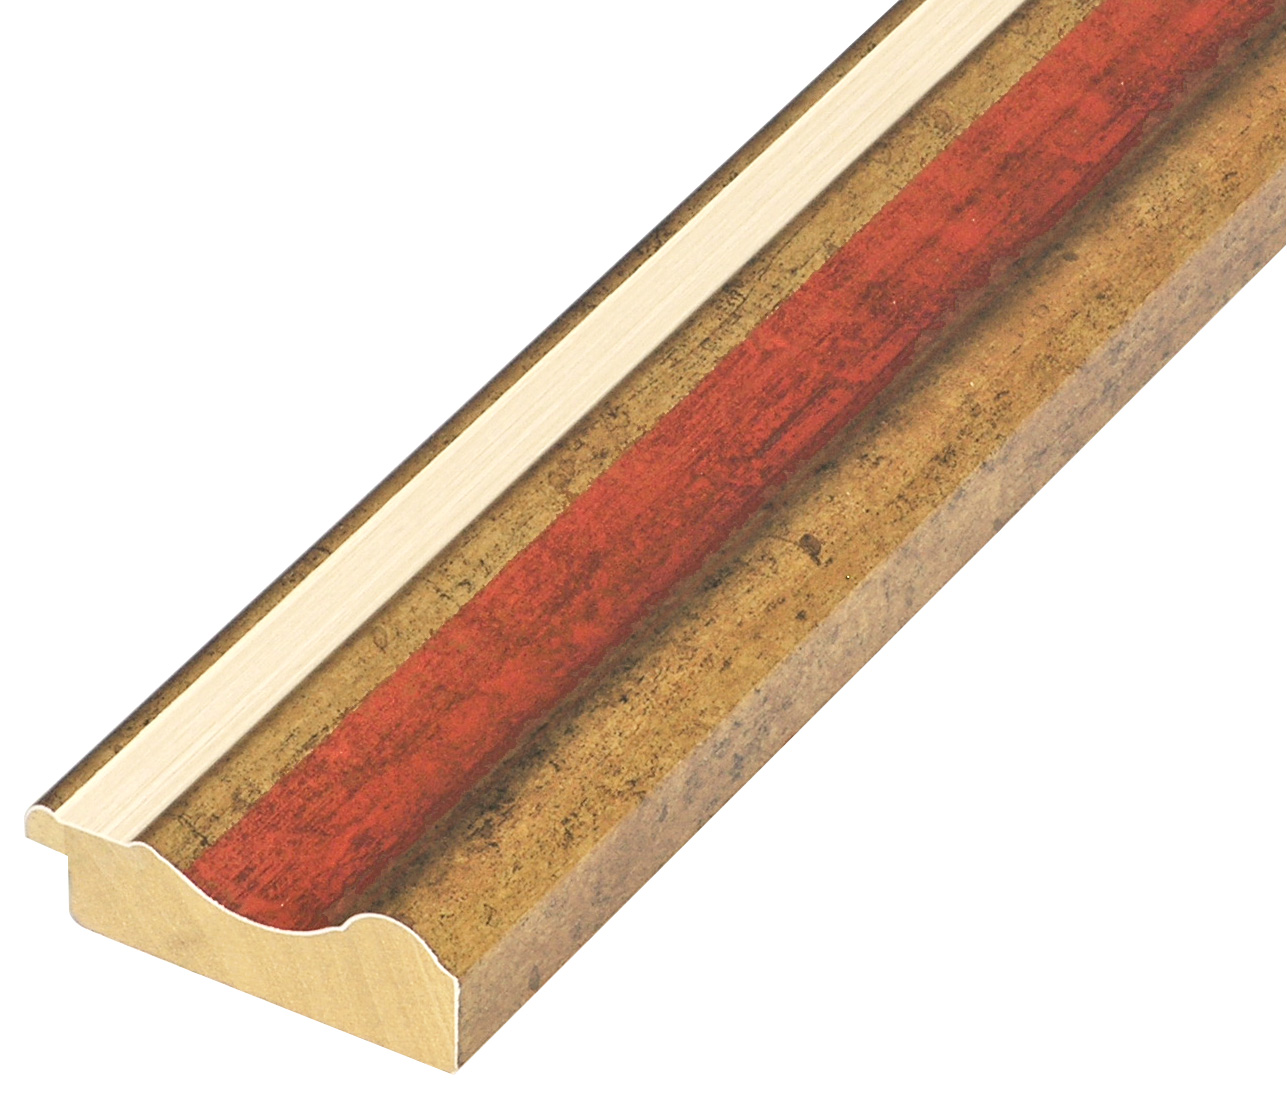 Moulding finger-jointed pine - width 61mm height 20 - Gold, red band